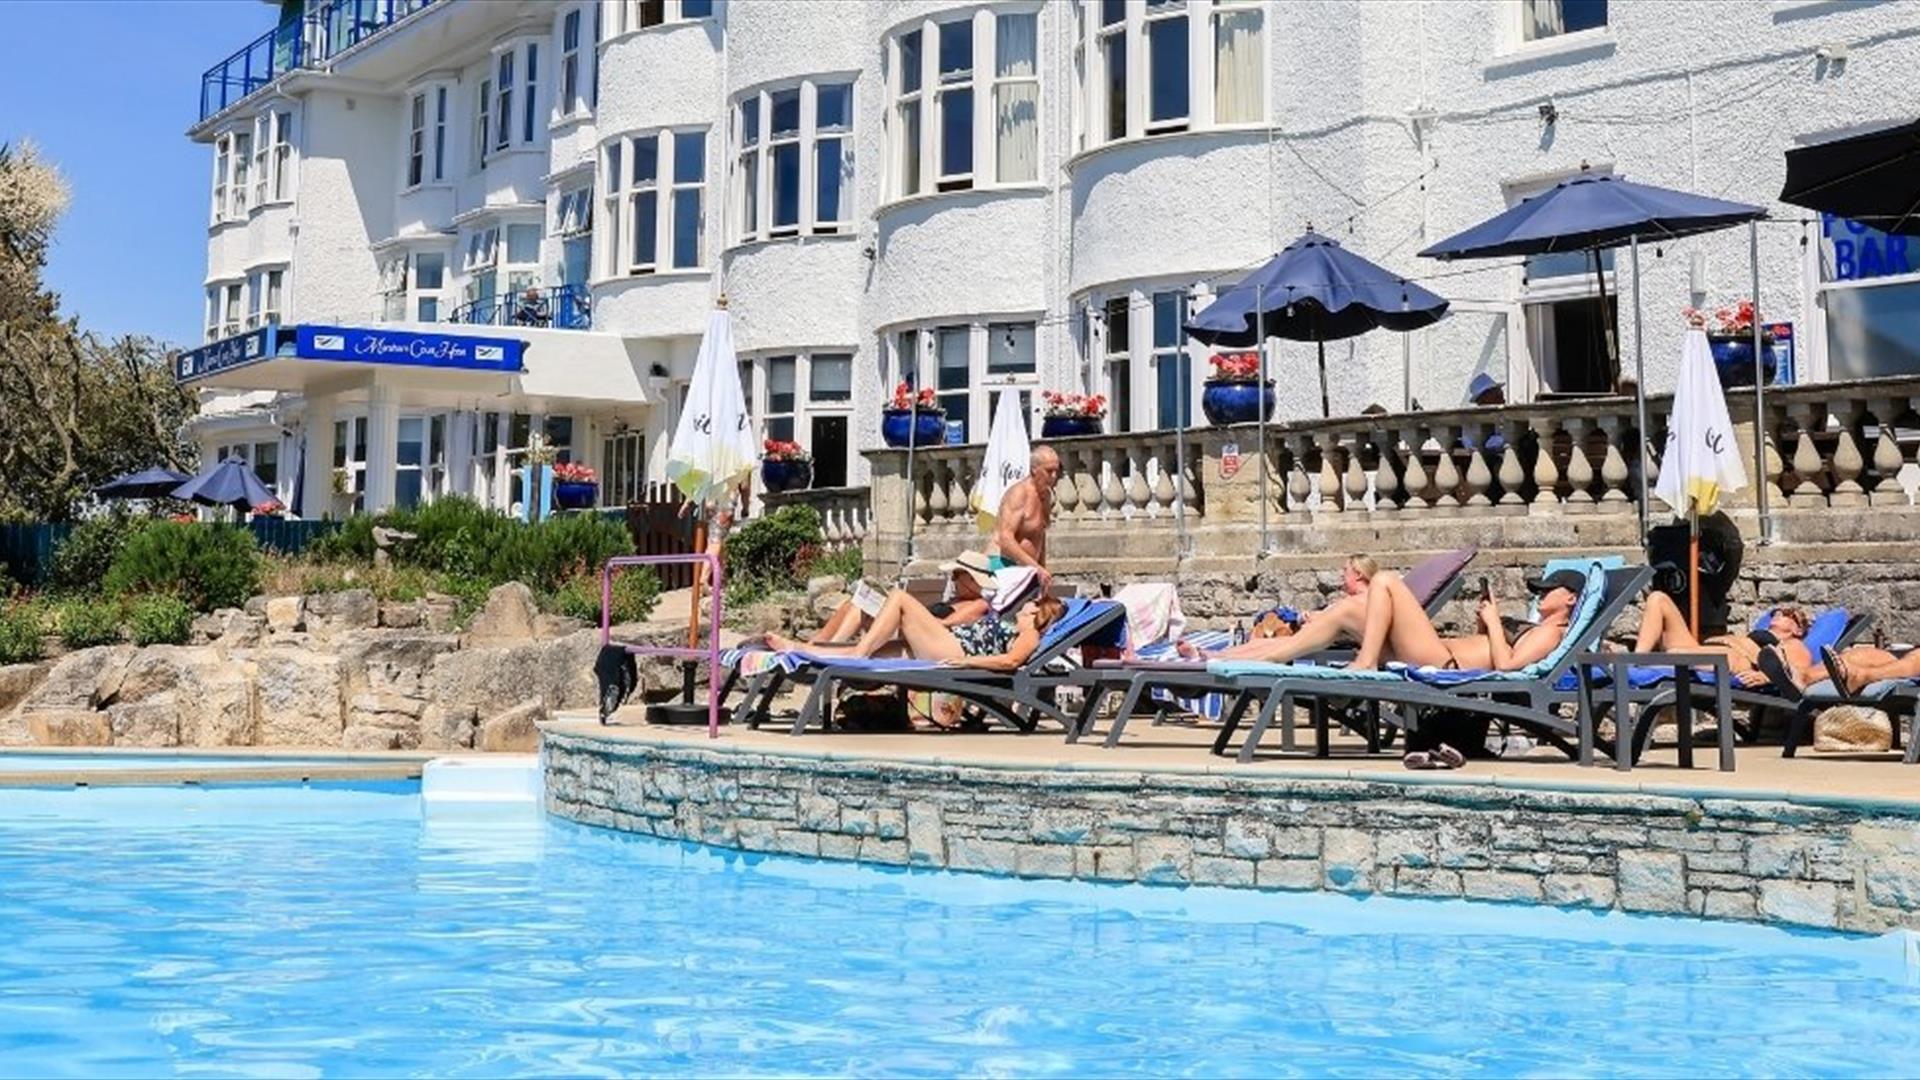 Guests soacking up the sun poolisde at the Marsham Court Hotel